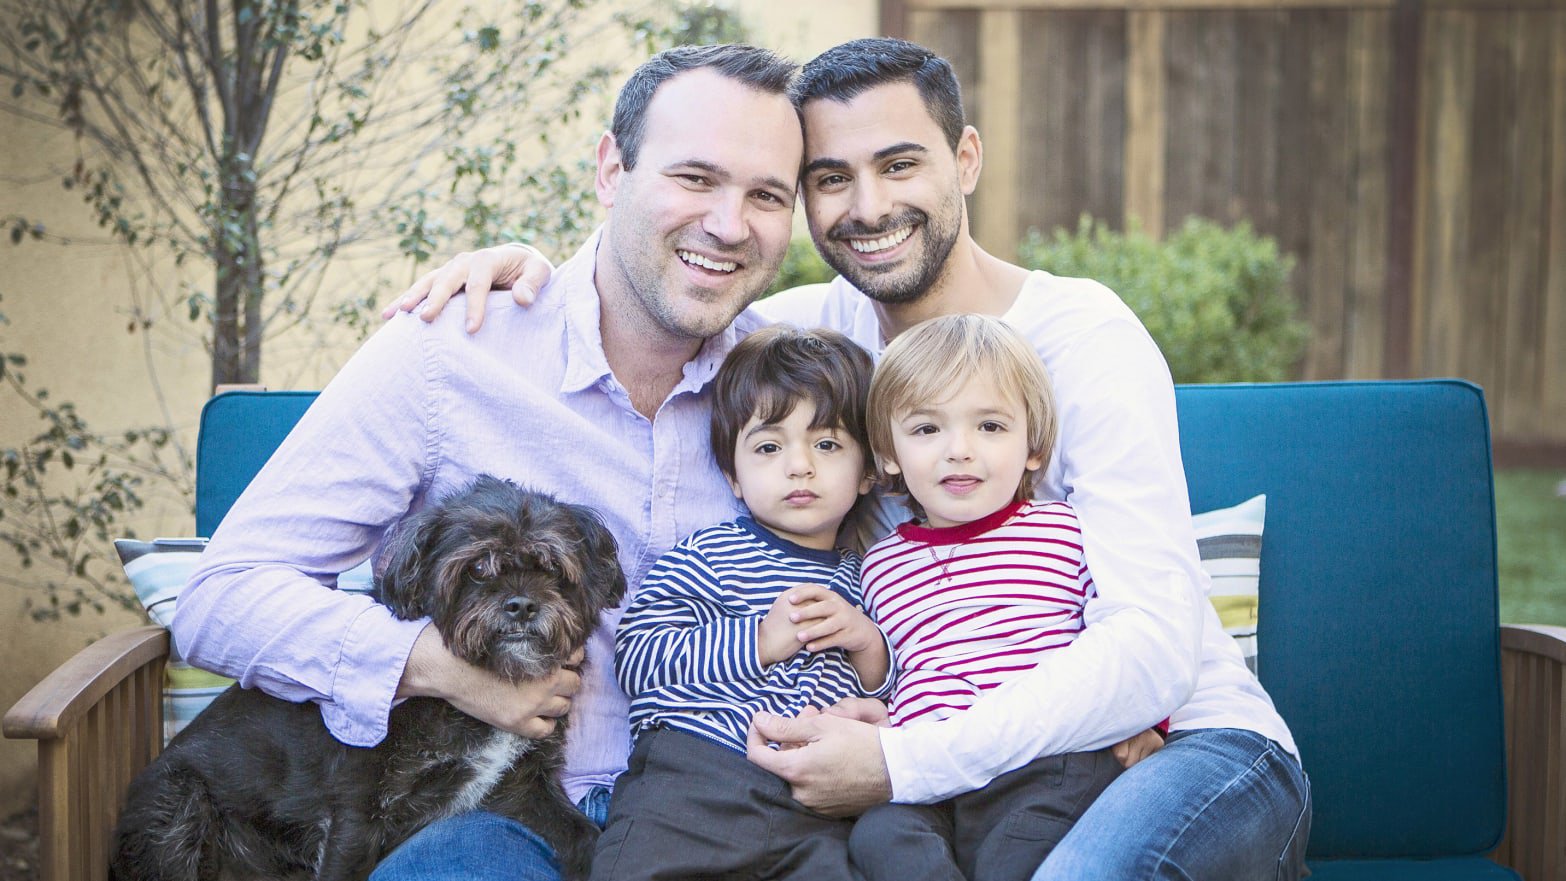 U.S. State Department Appeals to Ninth Circuit a Ruling That Same-Sex Couple’s Child Acquired Citizenship Upon Birth Abroad